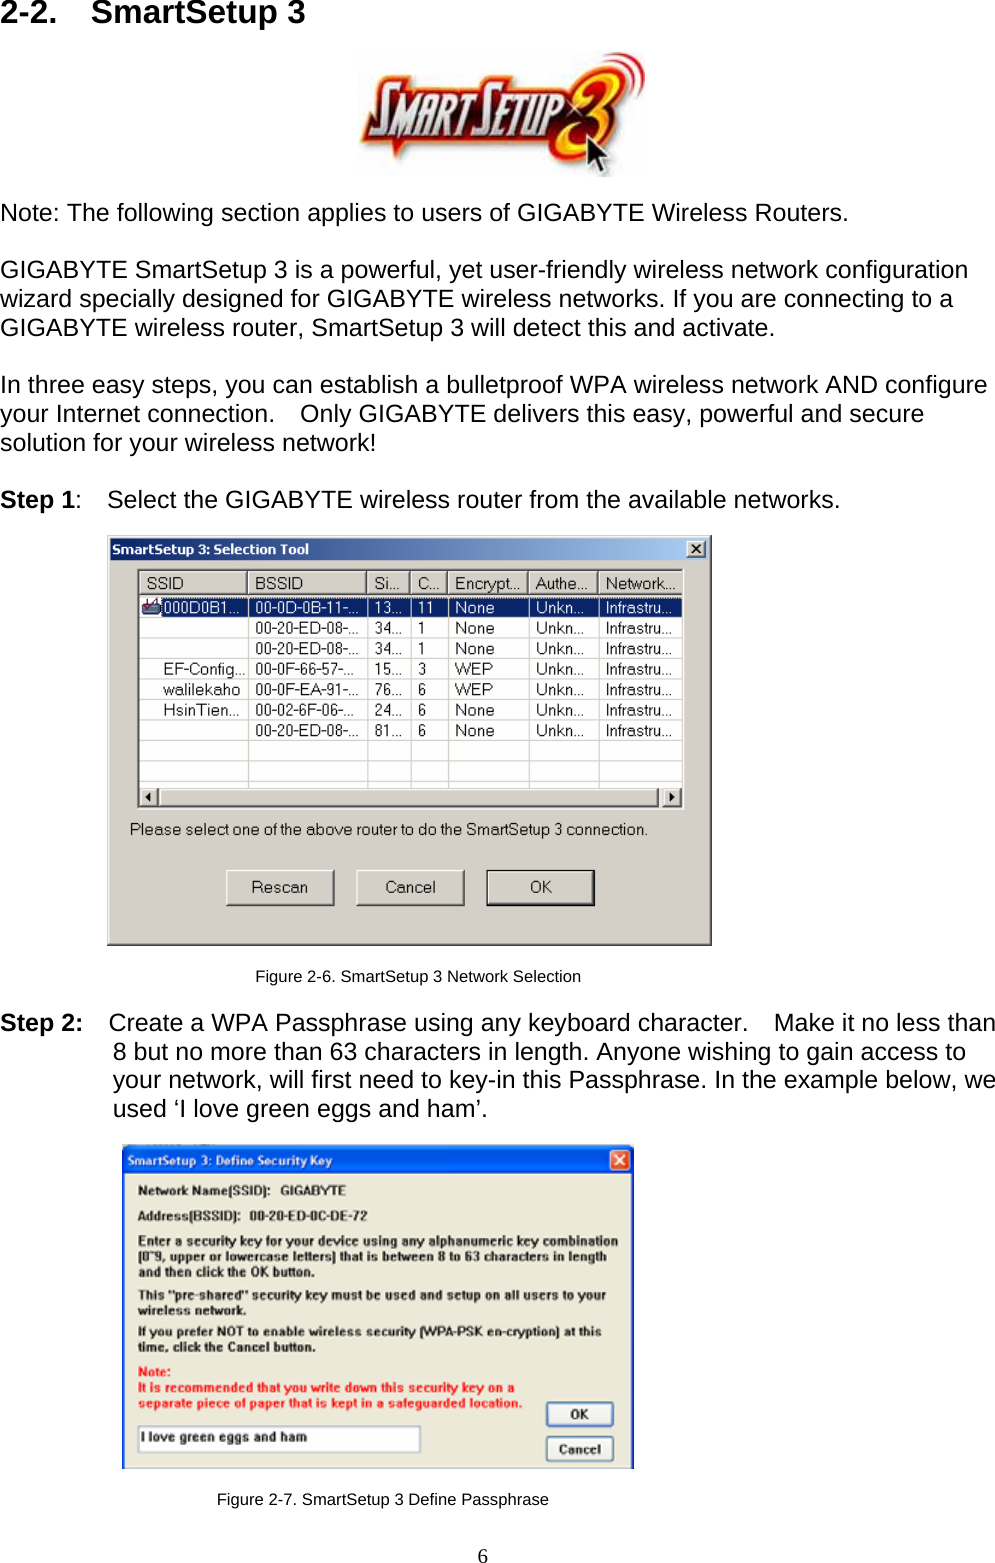 6   2-2.  SmartSetup 3     Note: The following section applies to users of GIGABYTE Wireless Routers.  GIGABYTE SmartSetup 3 is a powerful, yet user-friendly wireless network configuration wizard specially designed for GIGABYTE wireless networks. If you are connecting to a GIGABYTE wireless router, SmartSetup 3 will detect this and activate.      In three easy steps, you can establish a bulletproof WPA wireless network AND configure your Internet connection.    Only GIGABYTE delivers this easy, powerful and secure solution for your wireless network!  Step 1:    Select the GIGABYTE wireless router from the available networks.    Figure 2-6. SmartSetup 3 Network Selection  Step 2:    Create a WPA Passphrase using any keyboard character.    Make it no less than 8 but no more than 63 characters in length. Anyone wishing to gain access to your network, will first need to key-in this Passphrase. In the example below, we used ‘I love green eggs and ham’.    Figure 2-7. SmartSetup 3 Define Passphrase 